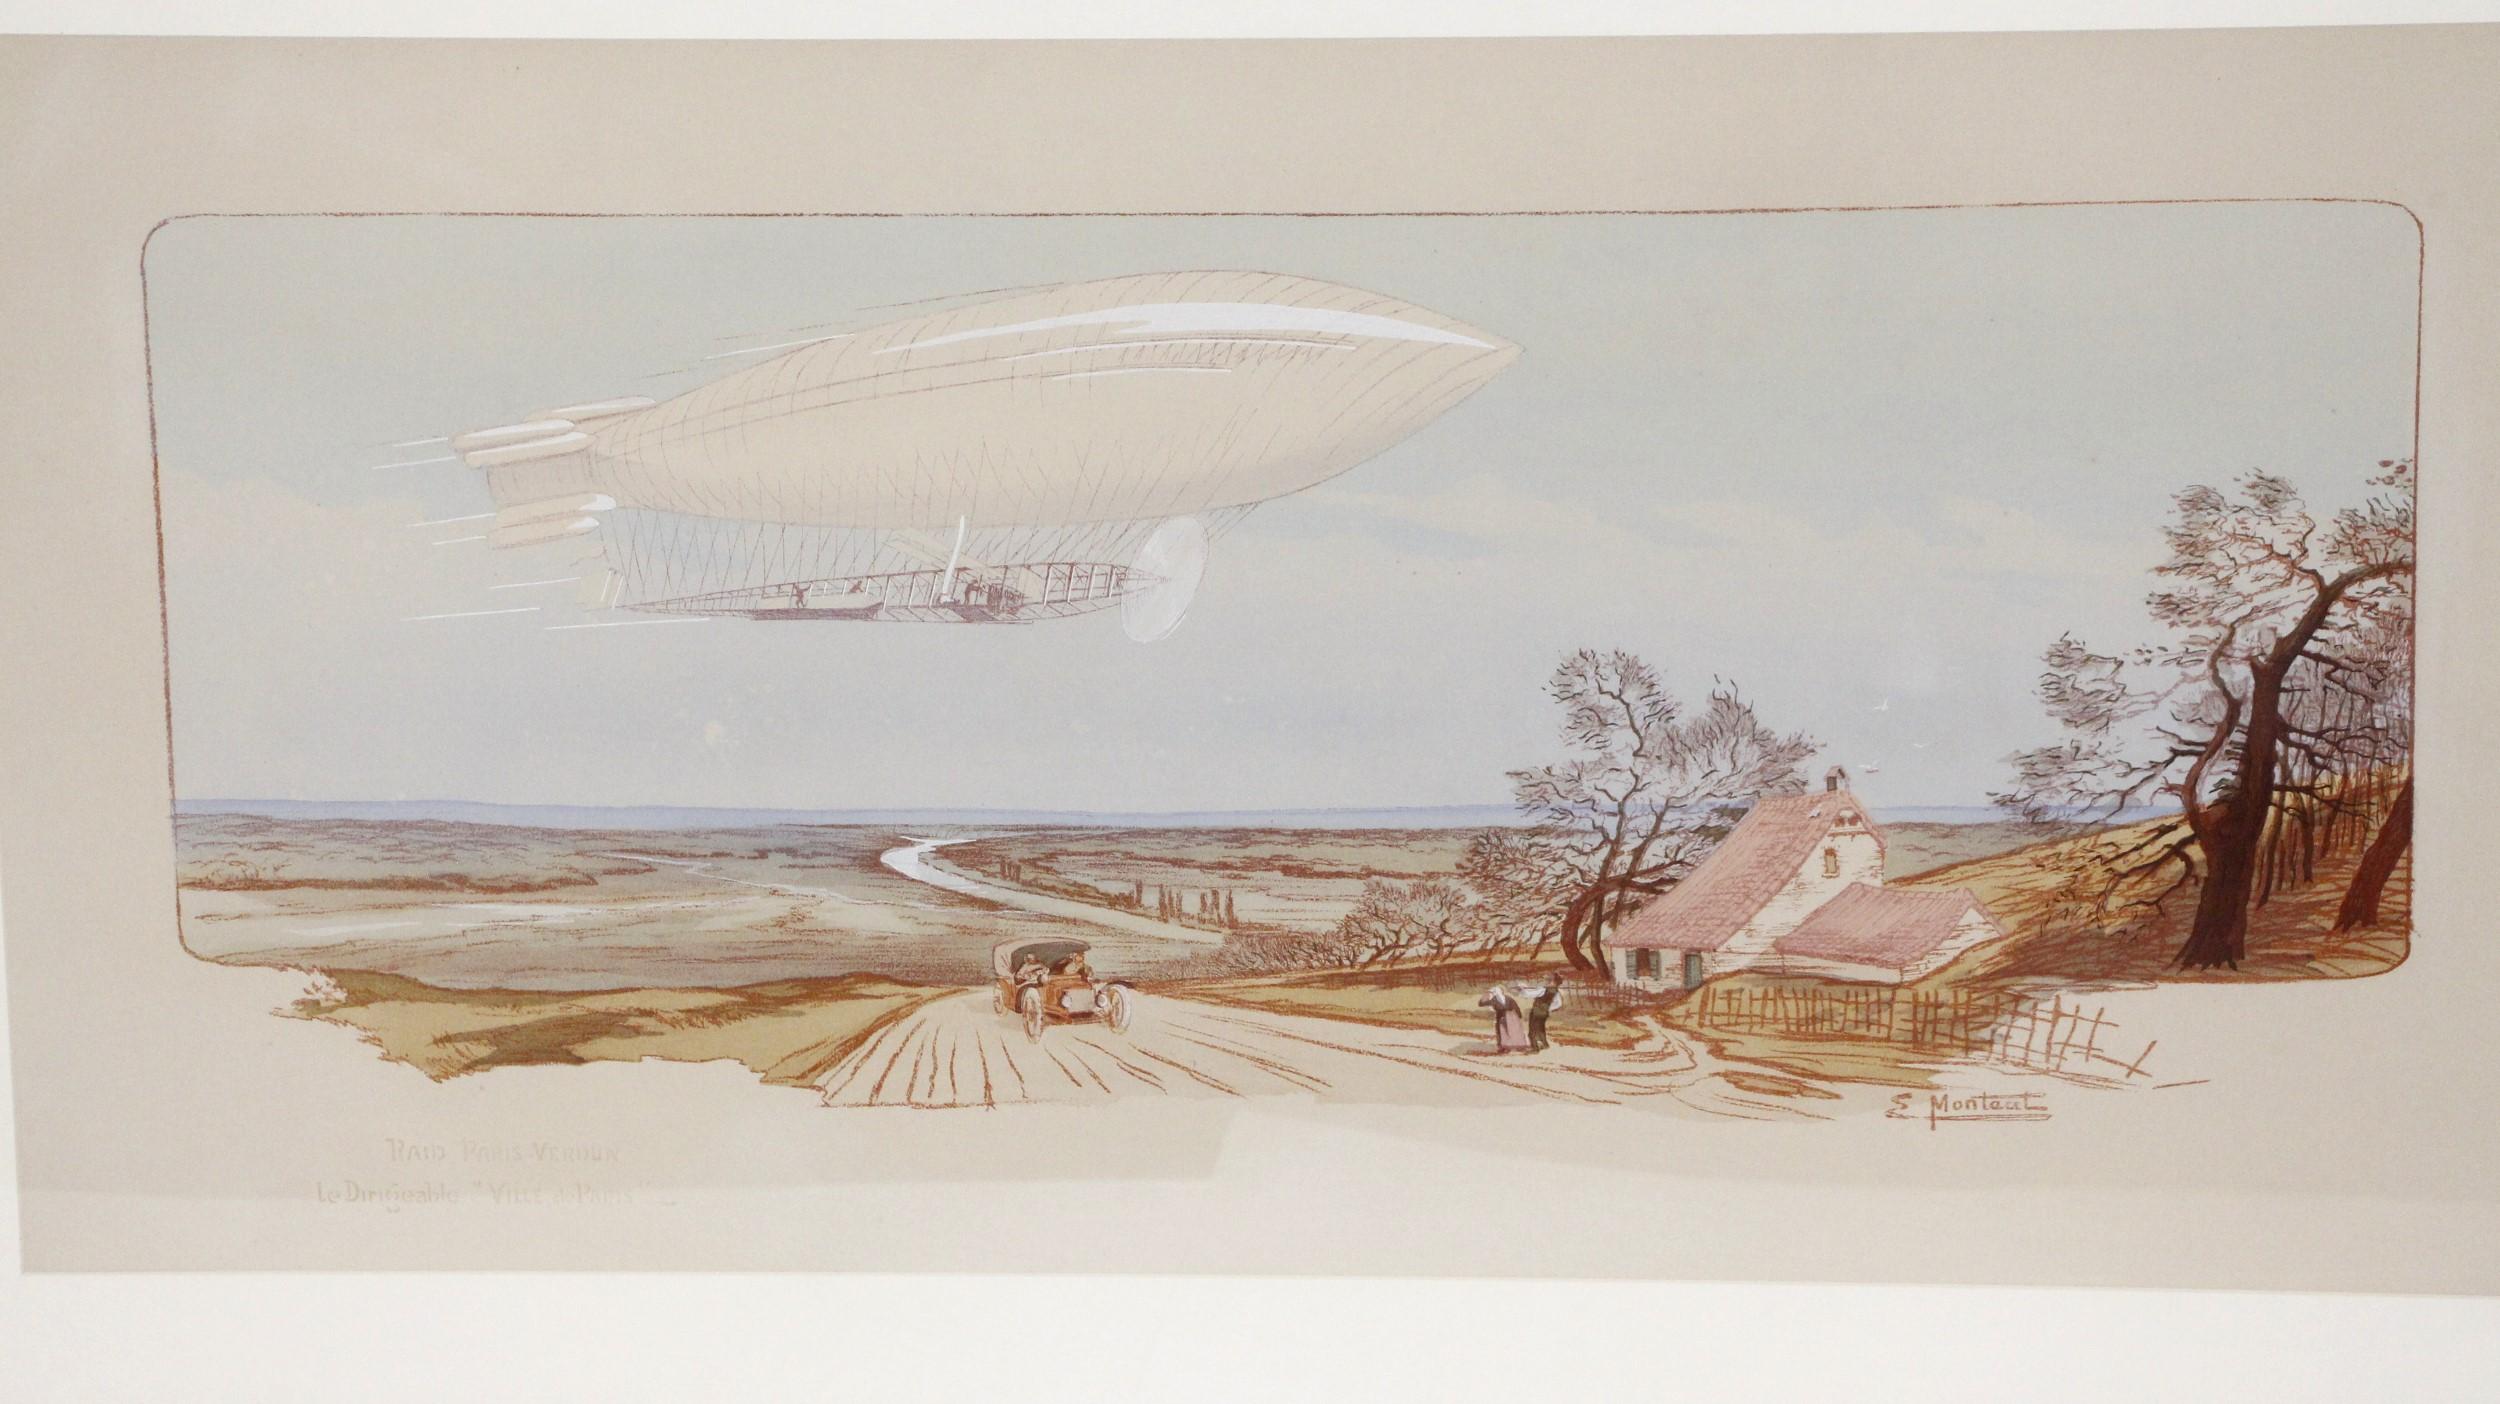 Early 20th Century French lithograph signed E(arnest) Montaut. Printed using the pochoir process style of printing where ink is applied through precut stencils. The scene depicts both a Zeppelin and an early car. The team of Gamy and Earnest Montaut